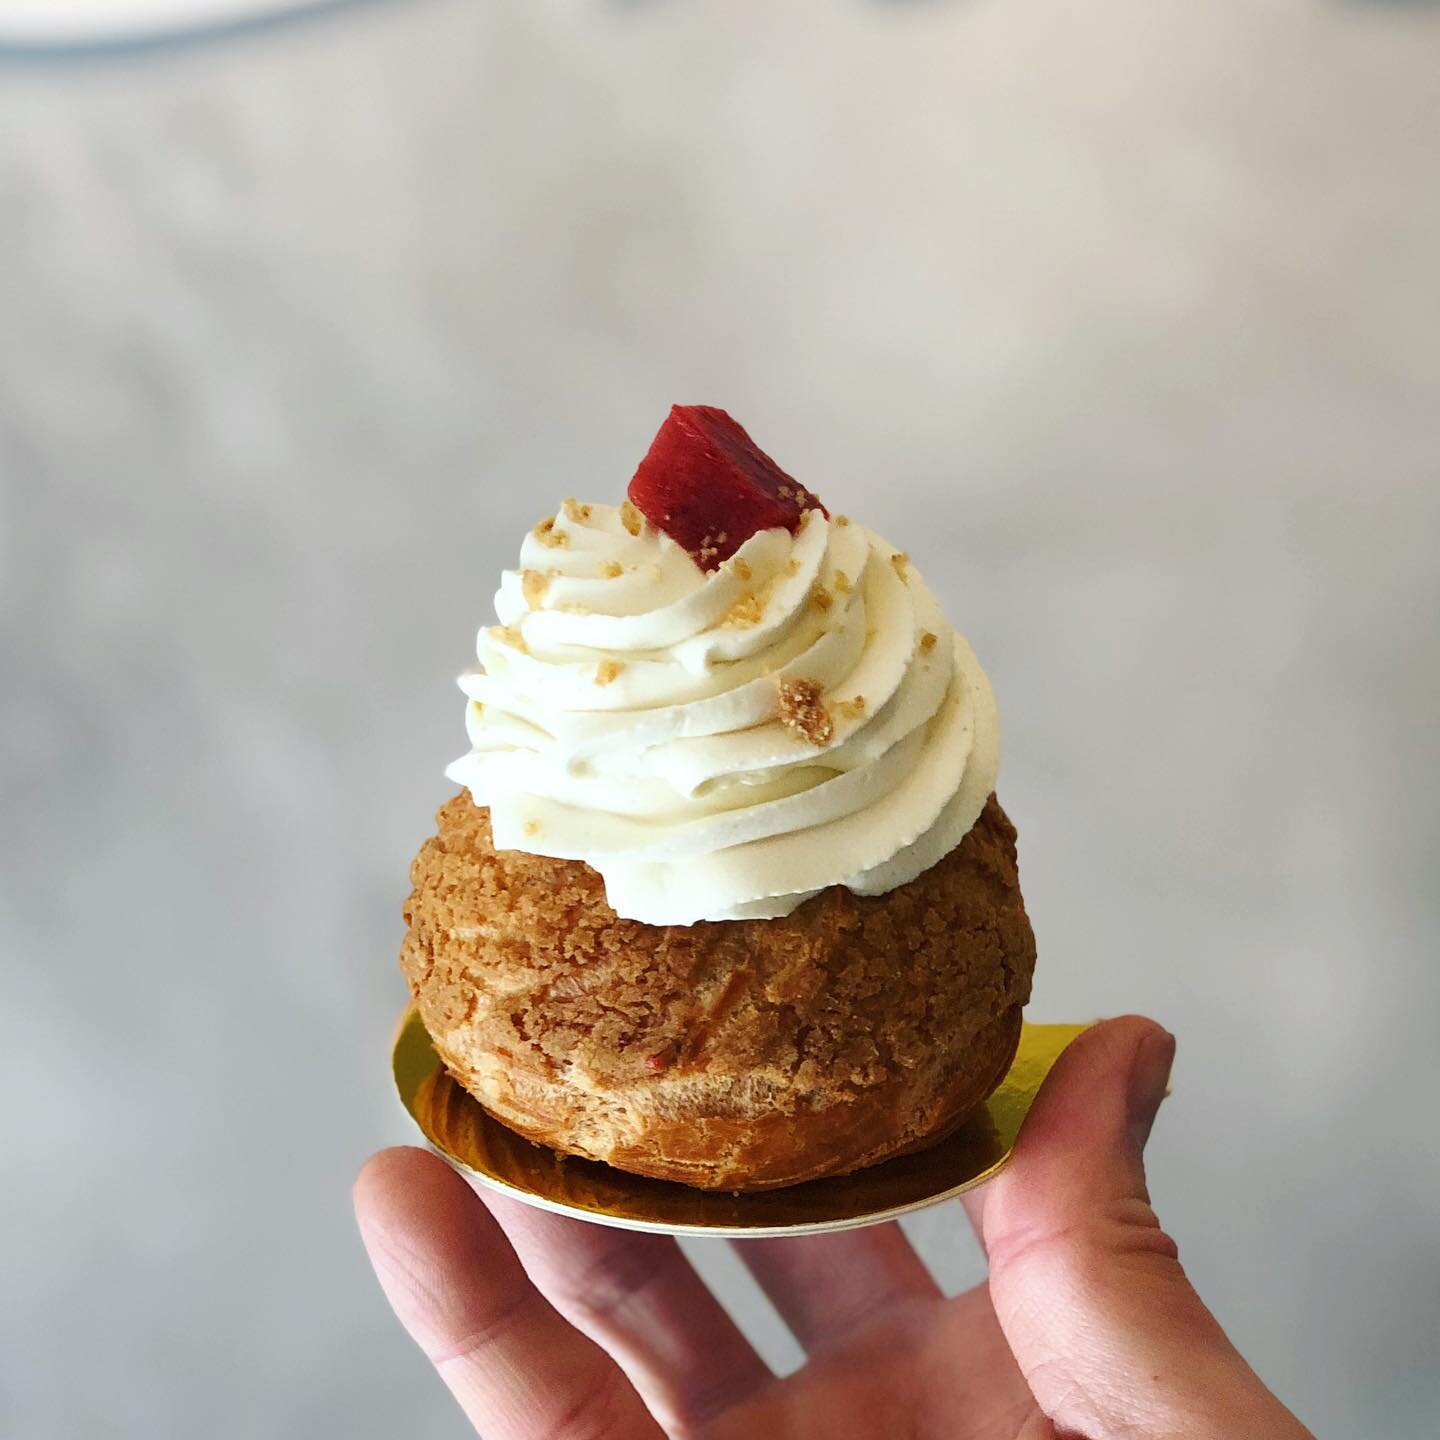 New creampuffy!

At this moment we have the strawberry cream puff for walk-in only but soon it will be on the menu for you to preorder. As long as strawberry is available locally, this will be available.

Inside the choux is a vanilla diplomat with c